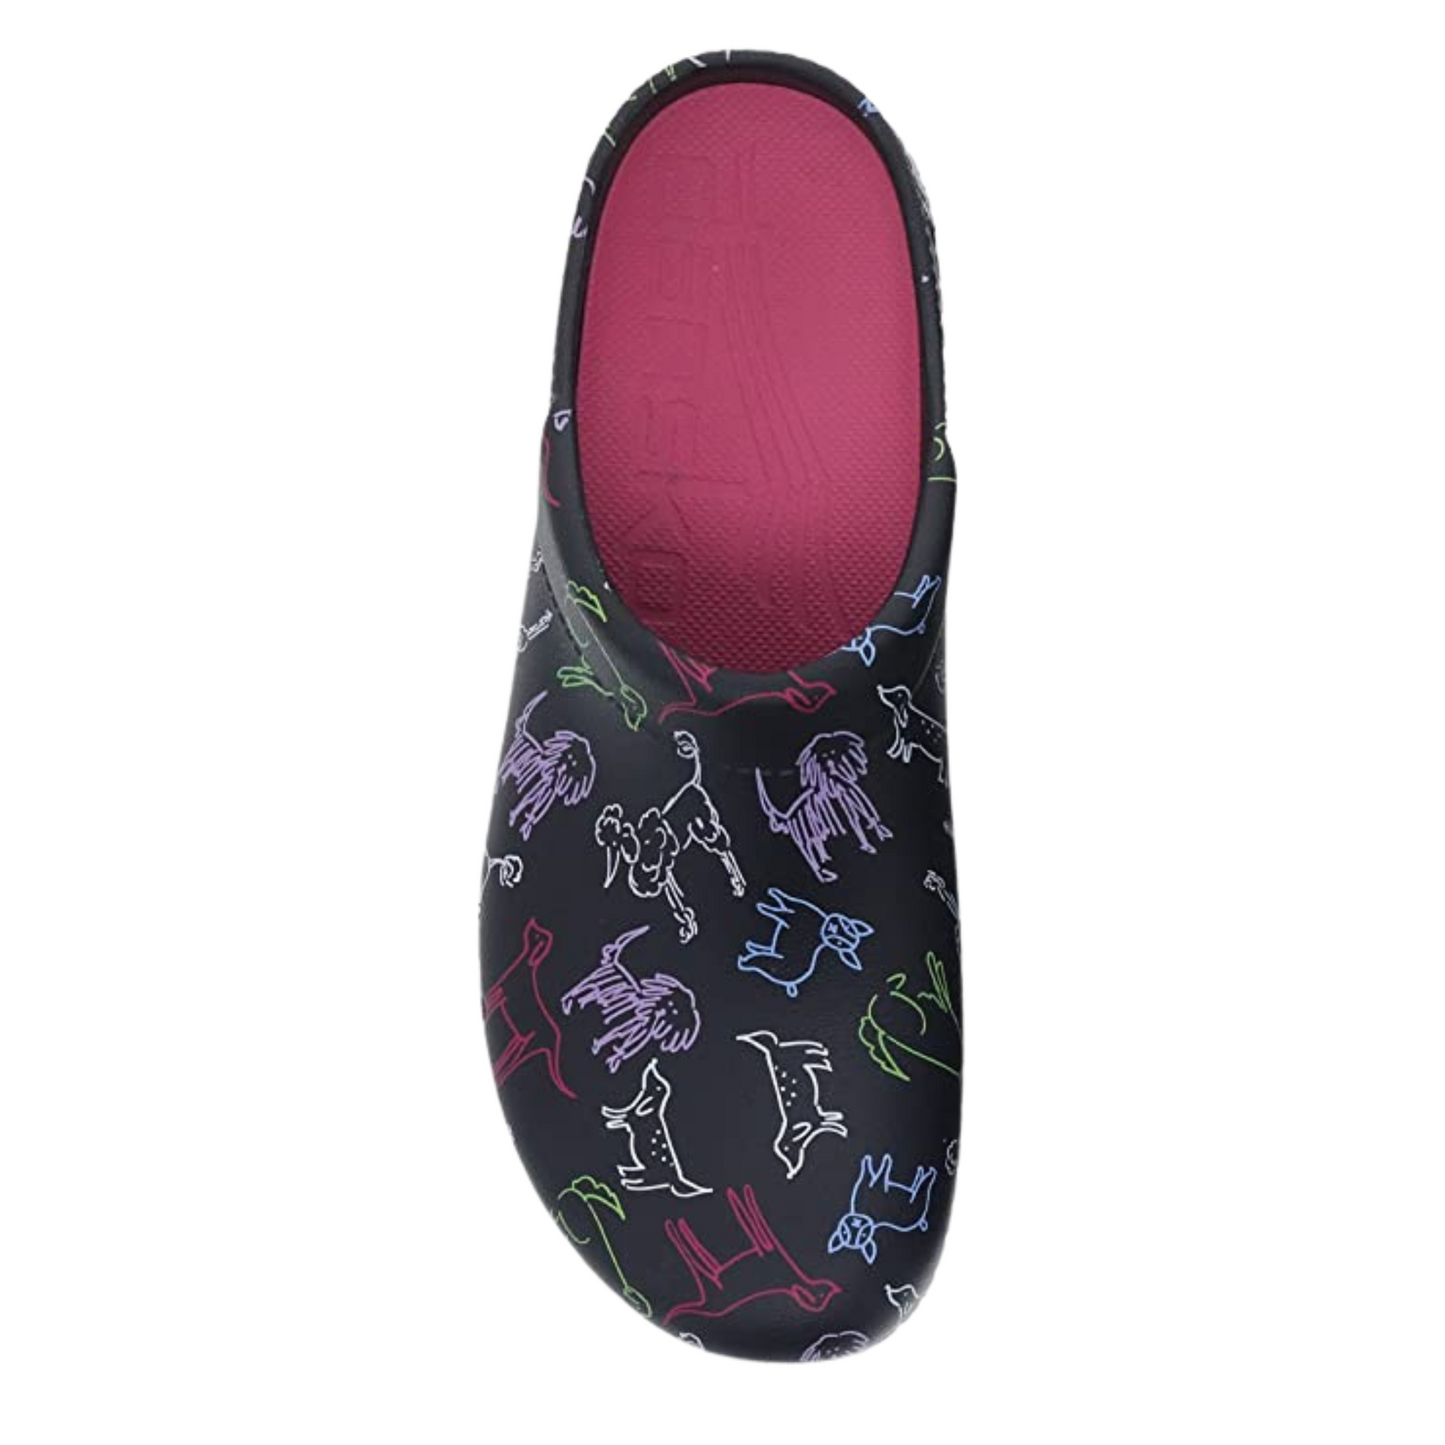 A top view of a black clog with a colourful dog pattern, five small holes in the side, and a pink insole.